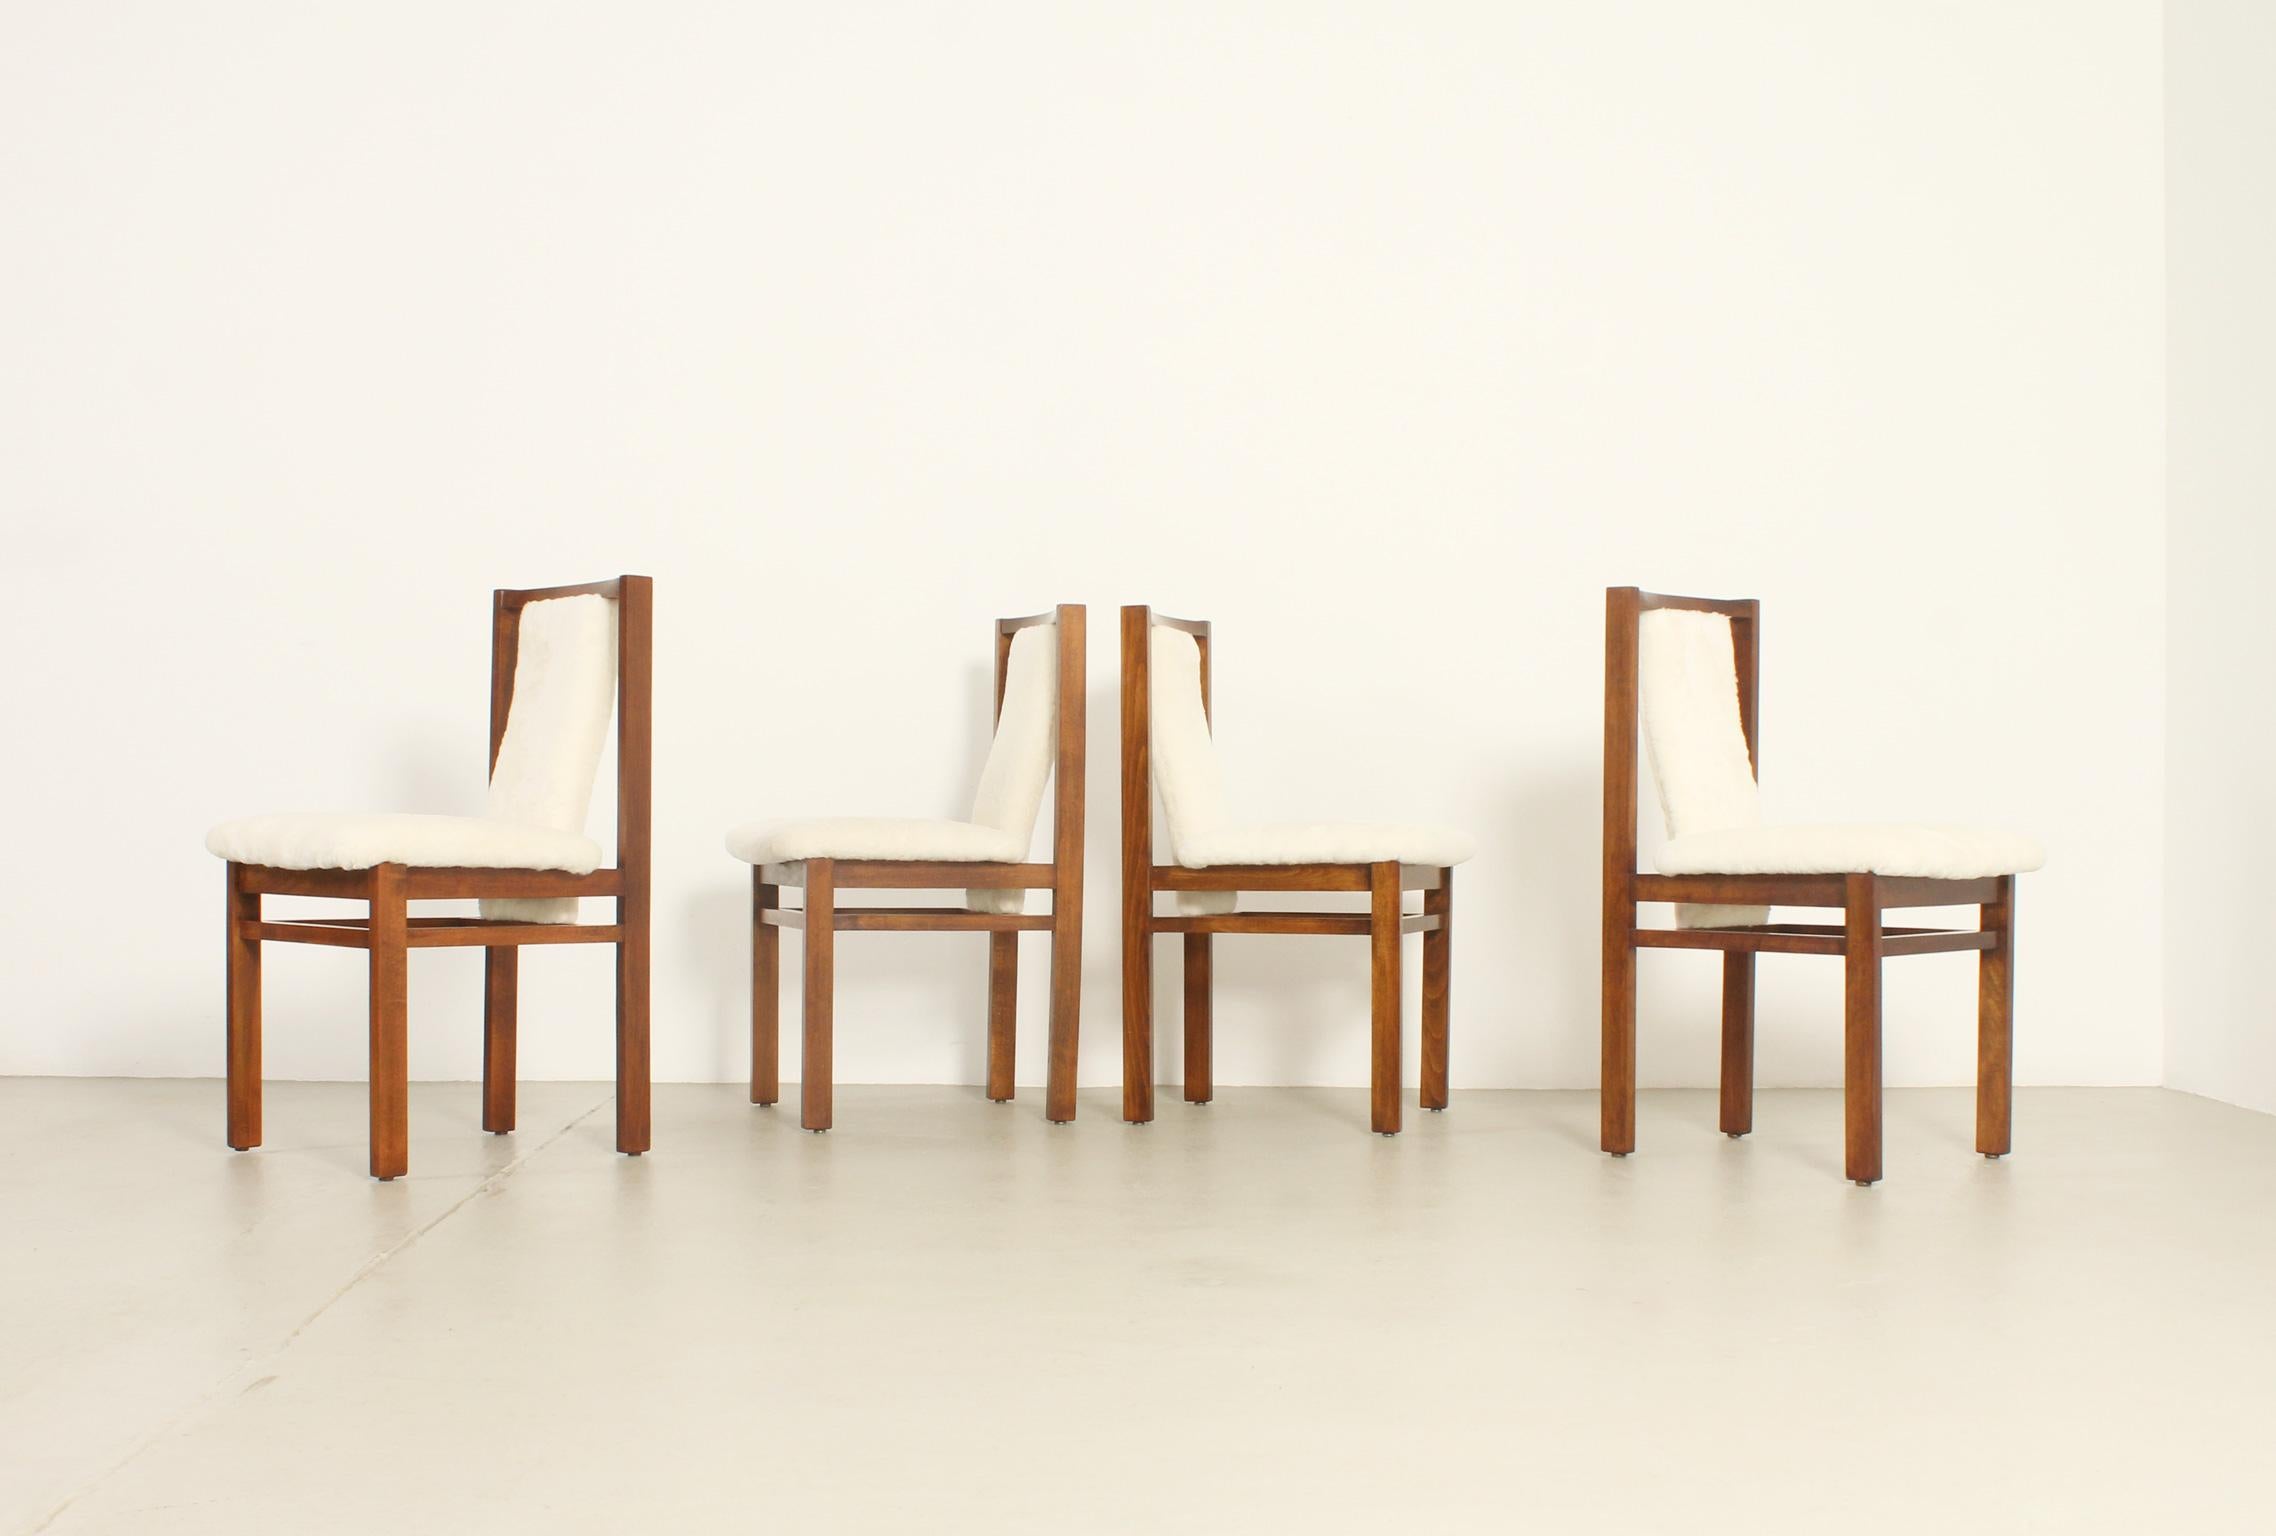 Four Dining Chairs by Jordi Vilanova in Oak Wood and Sheepskin, Spain, 1960's For Sale 6